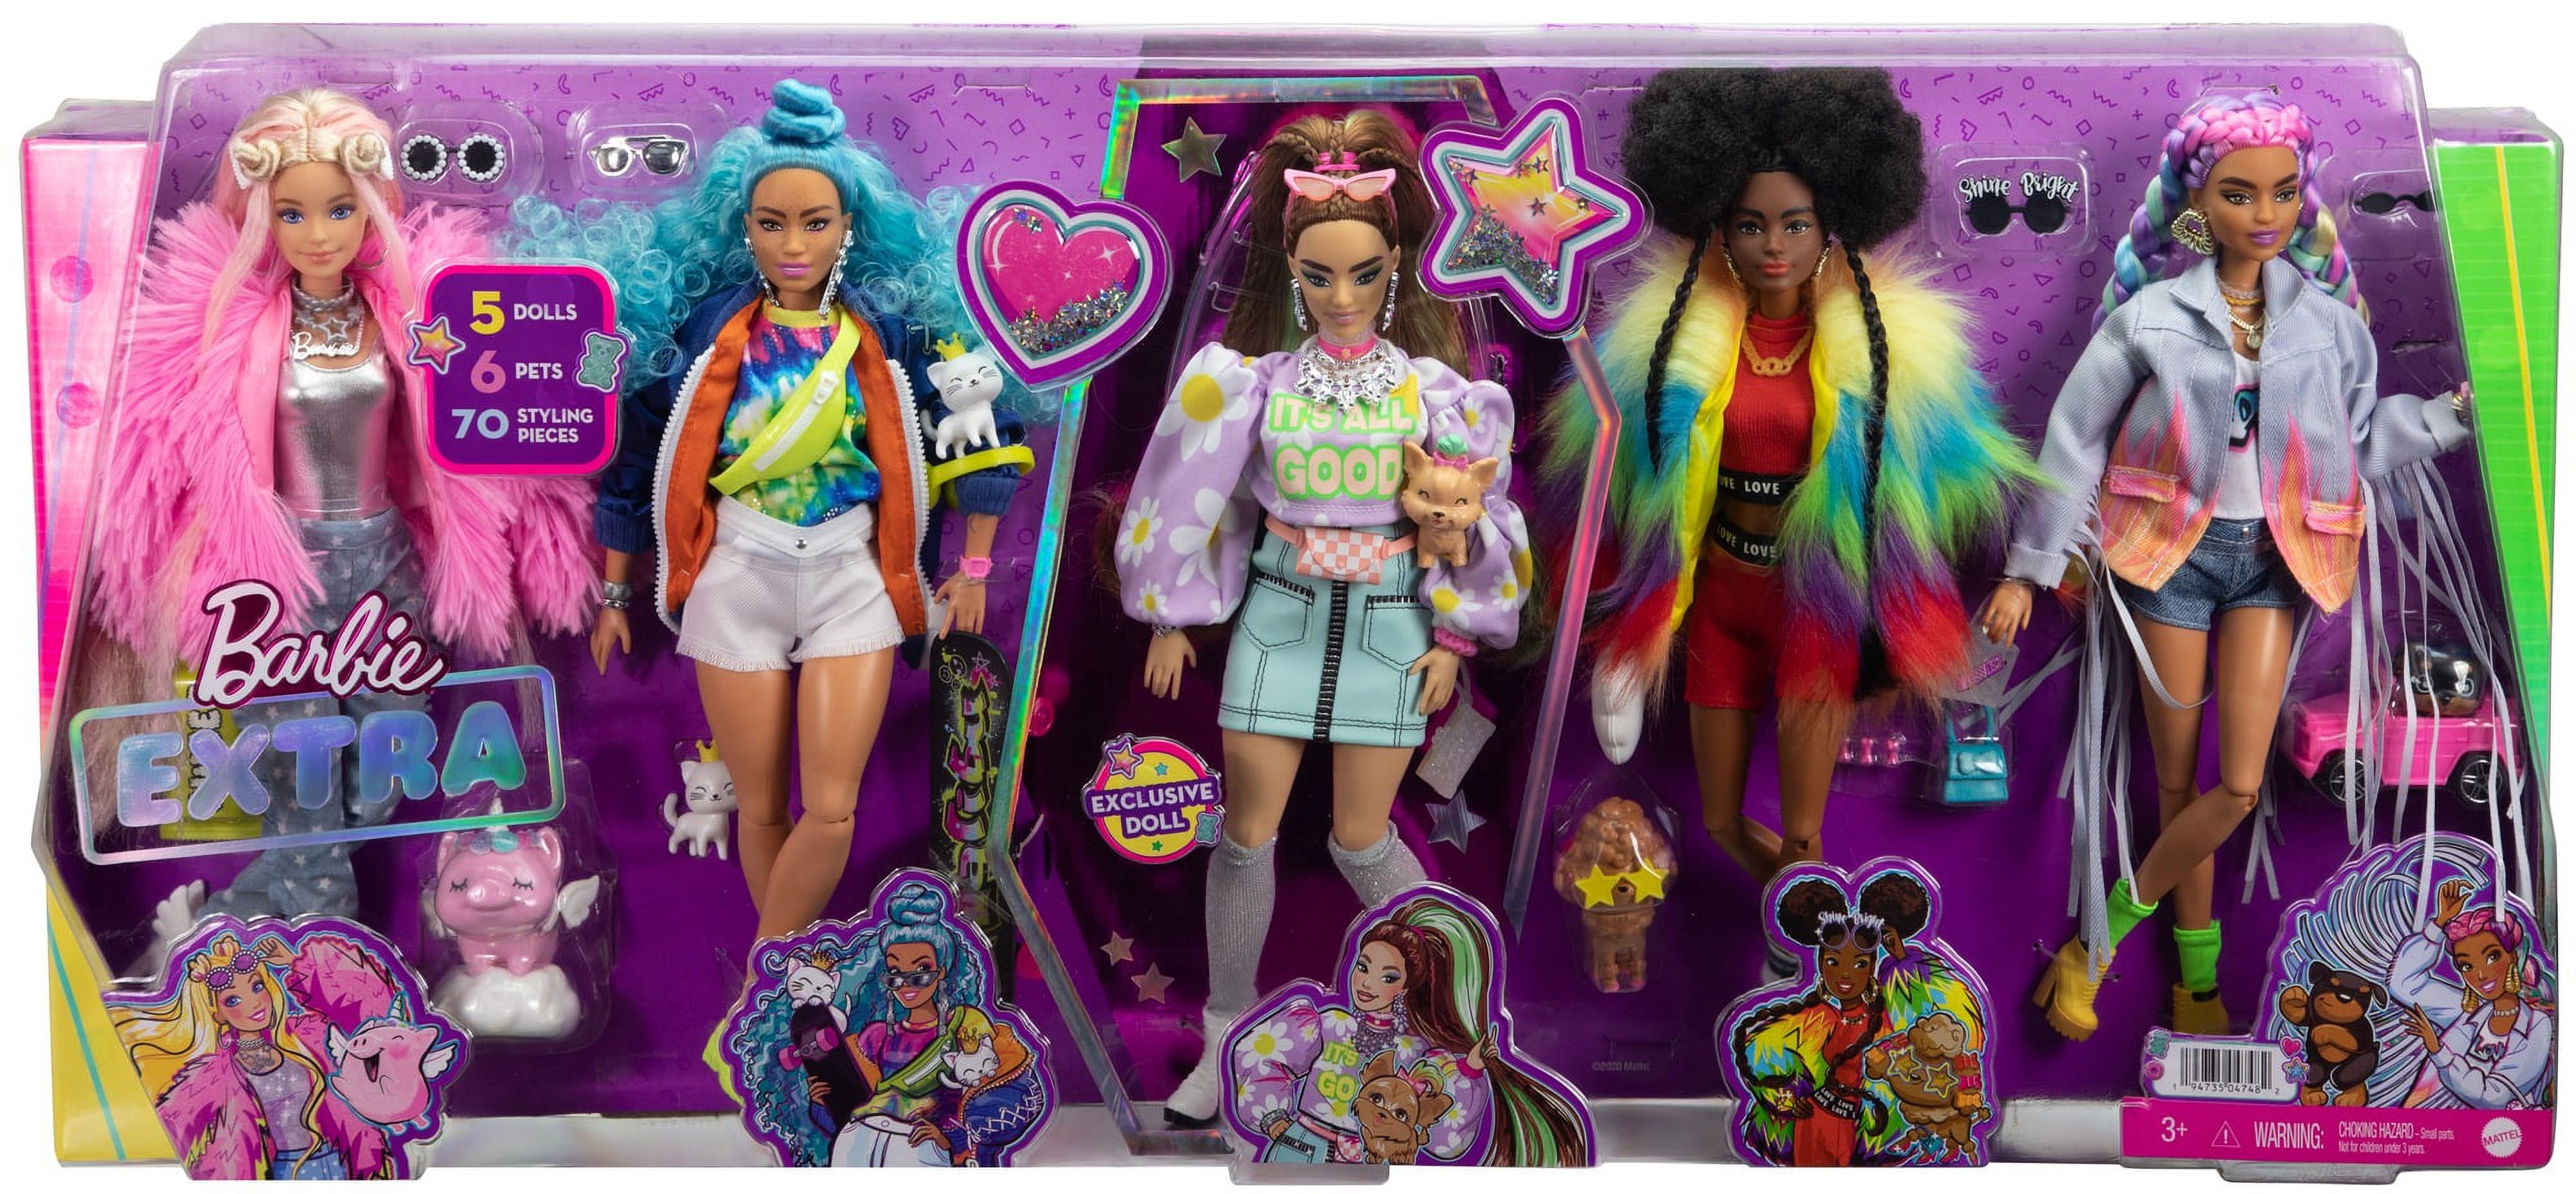 Barbie Extra Fashion Doll 5-Pack with 6 Pets & 70 Styling Pieces, Clothes & Accessories - image 1 of 22